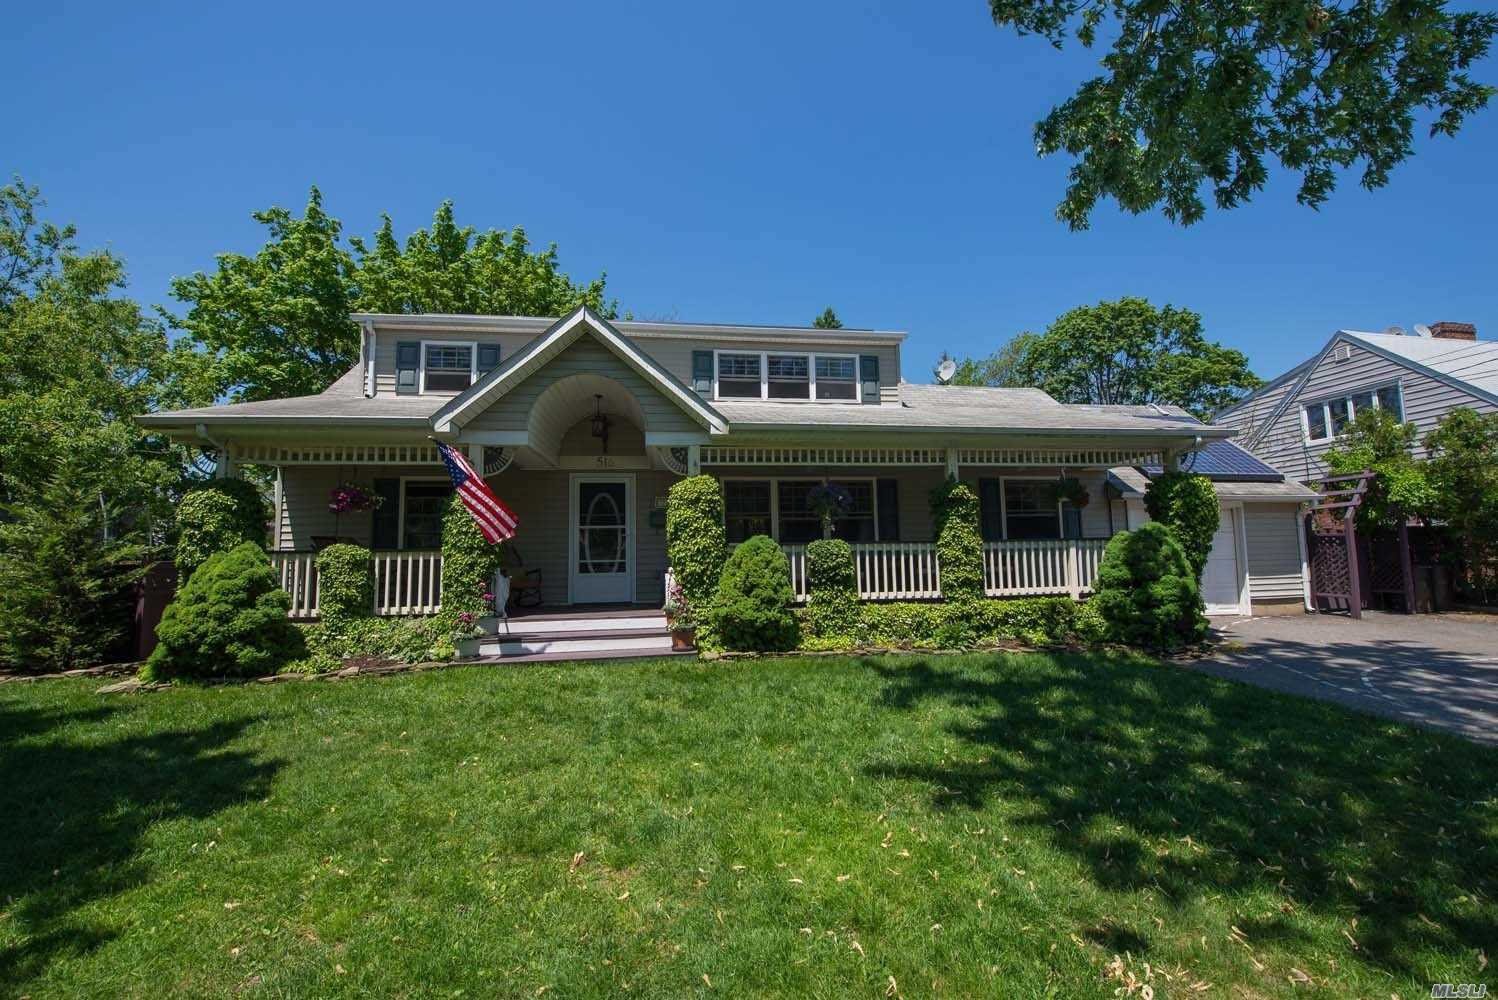 Welcome Home! Spacious Updated Colonial Offers 5 Bedrooms, 3 Fbths, Lr W/ Gas Fireplace, Newly Finished Hardwood Floors, Office, Den, Full Basement, Backyard Made To Entertain W/Deck, Seating & Built-In Grill, Fully Fenced Yard And Energy Efficient Solar Panels